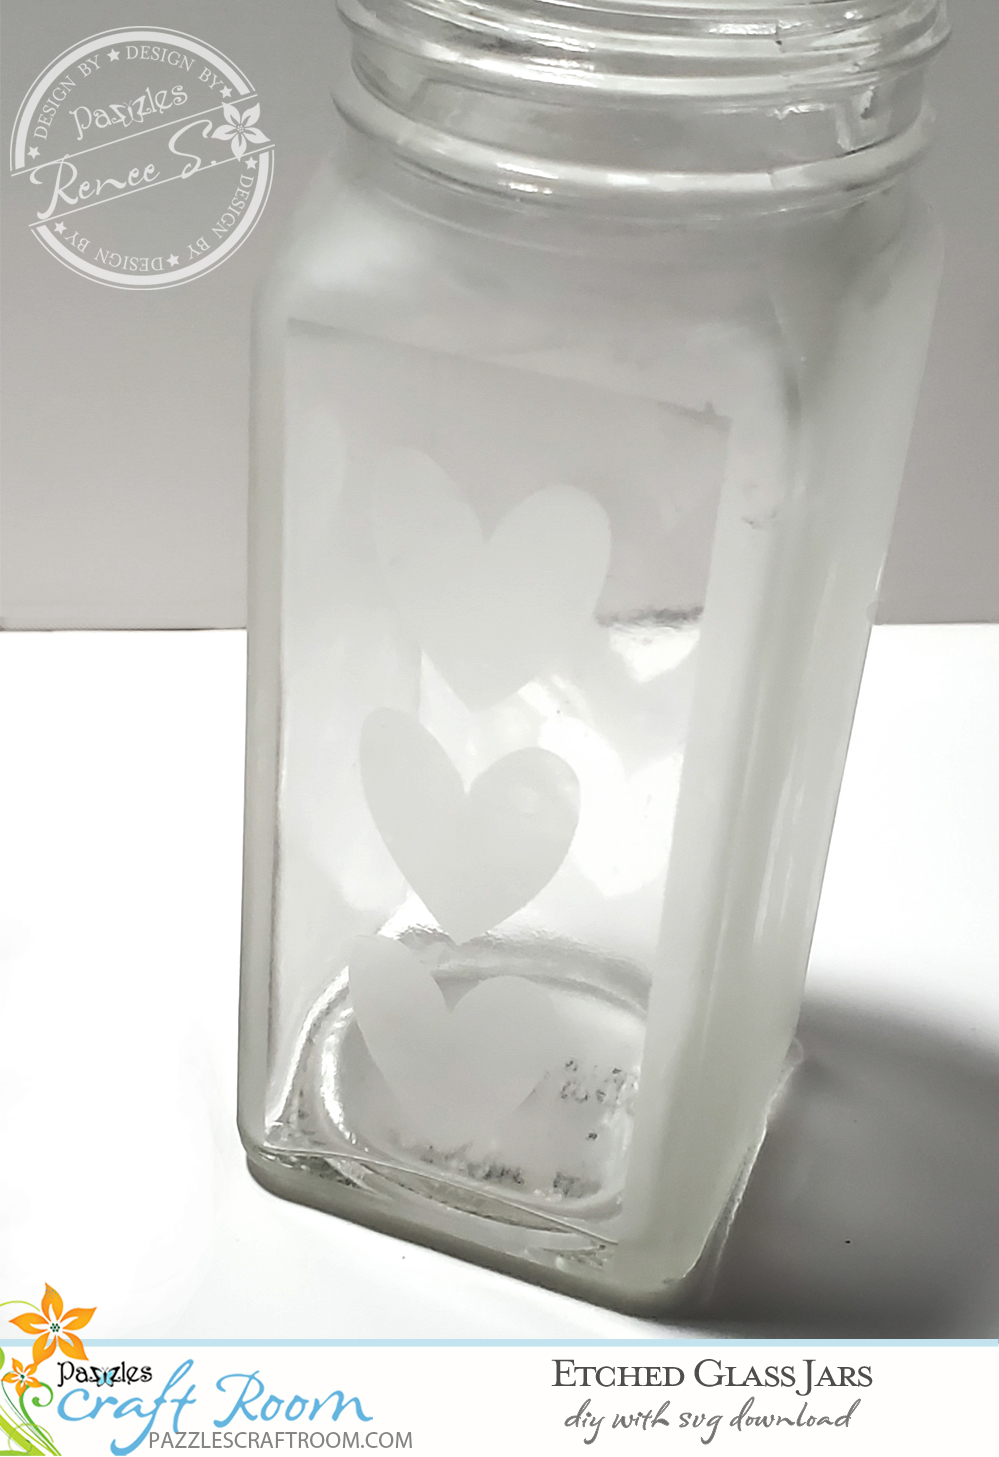 Pazzles DIY Etched Jars Upcycle with instant SVG download.  Instant SVG download compatible with all major electronic cutters including Pazzles Inspiration, Cricut, and Silhouette Cameo. Design by Renee Smart.